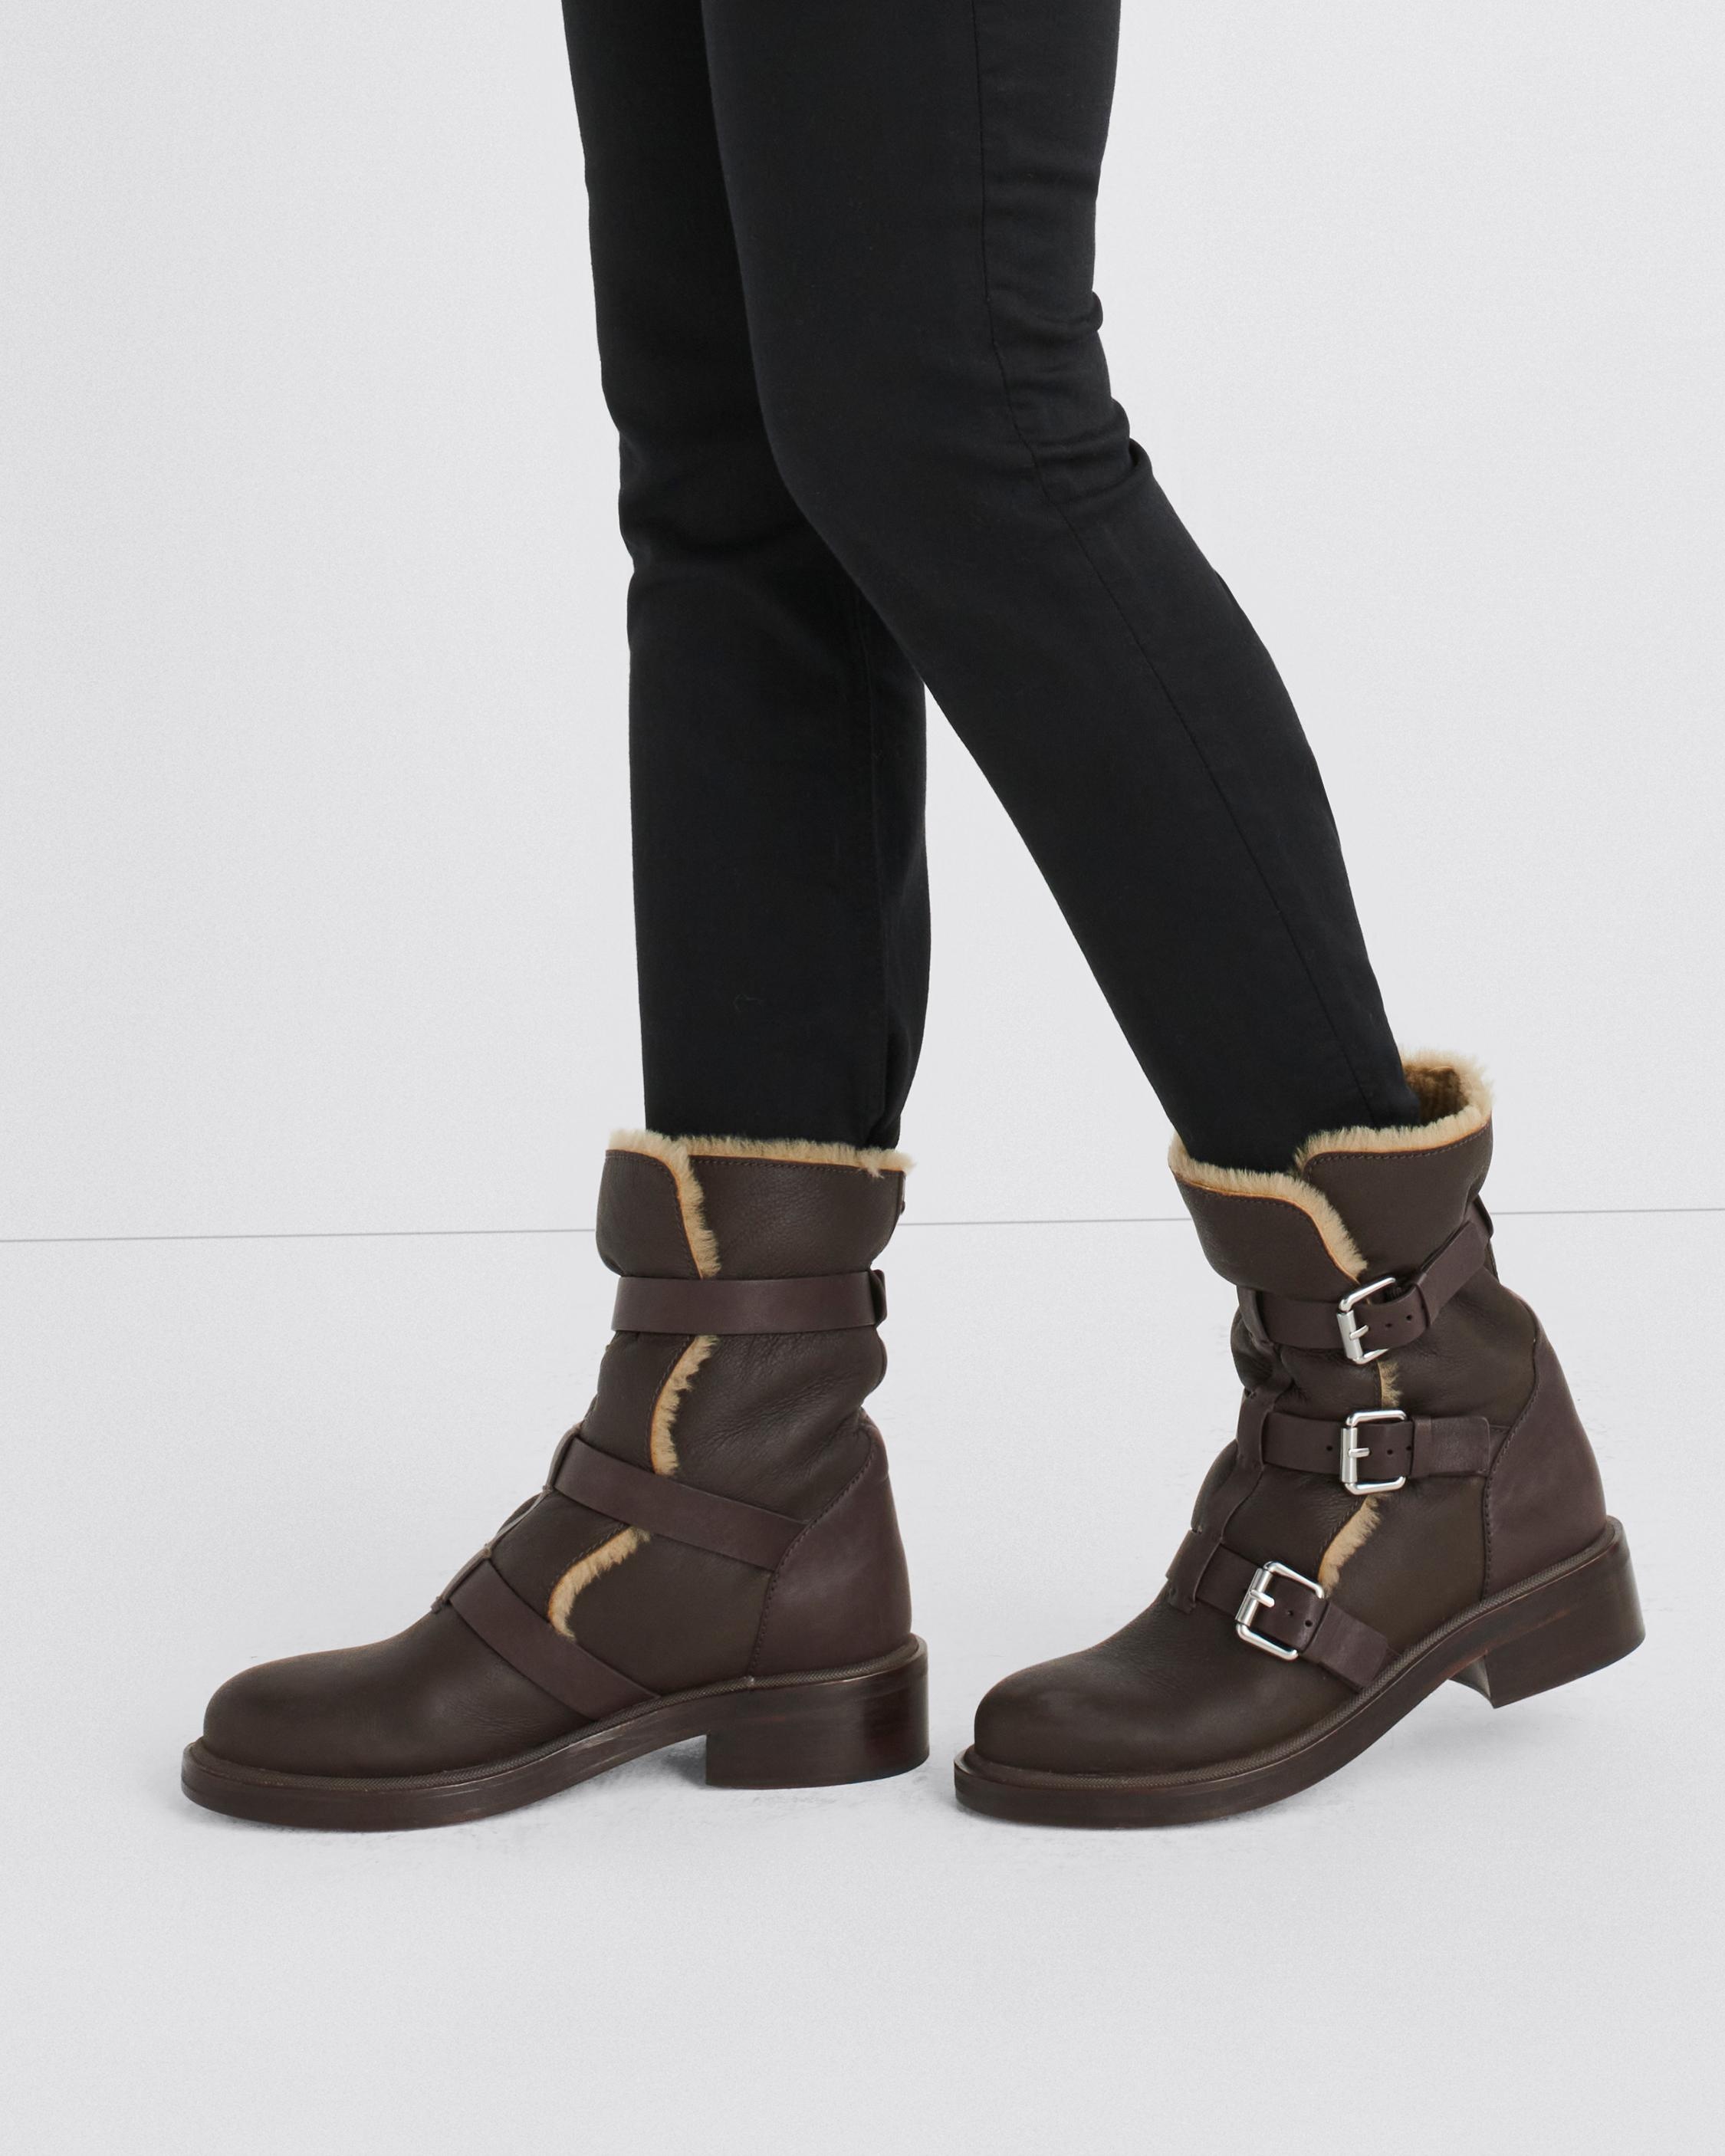 RB Moto Buckle Boot - Leather & Shearling
Mid-Calf Boot - 2